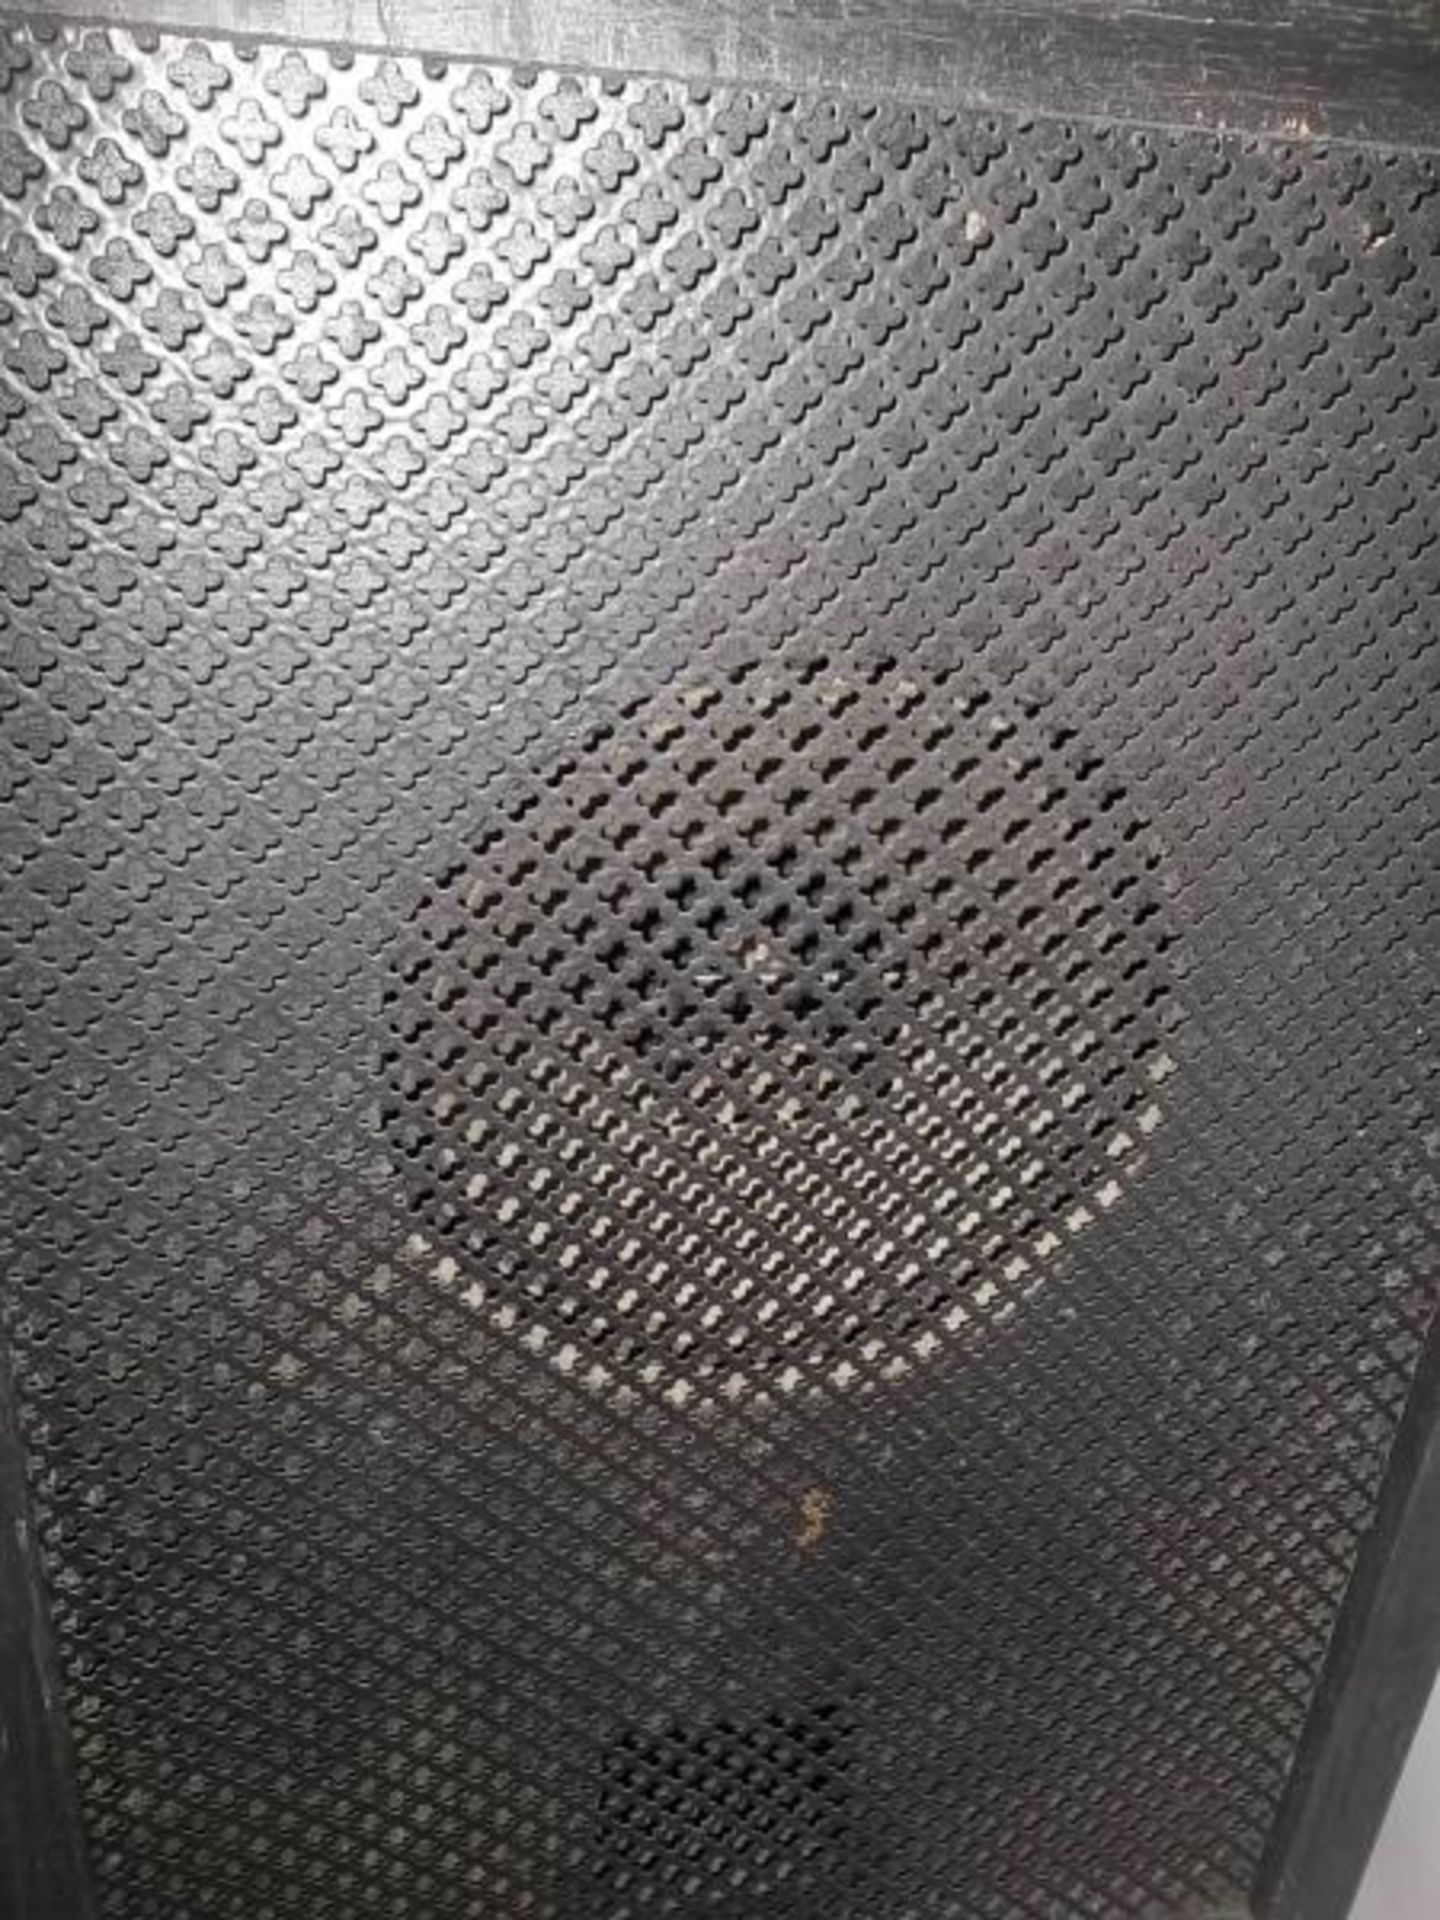 Pair of Altec speaker cabinets, painted black with one speaker in each, some damage to screens and - Image 8 of 12